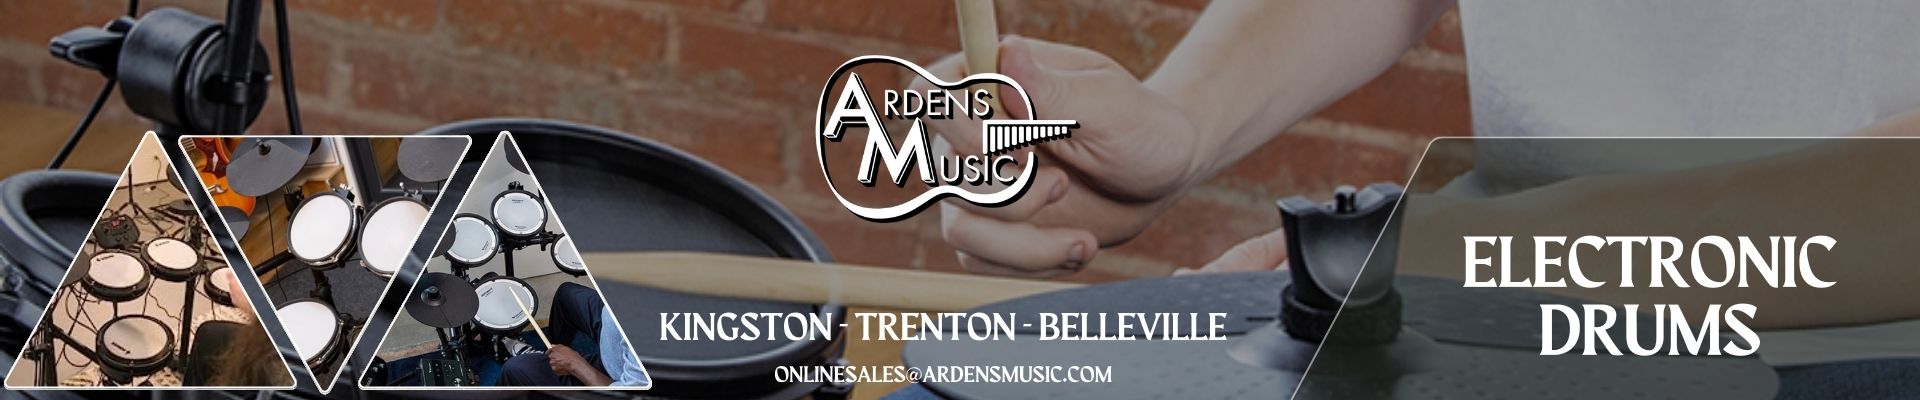 Drums and percussion are the backbone of all the music you hear in your daily life. Arden's offers a wide variety of Acoustic & Electronic kits, as well as cymbals, hardware and accessories from brands like Roland, Alesis, Tama, Pearl, and Zildjian